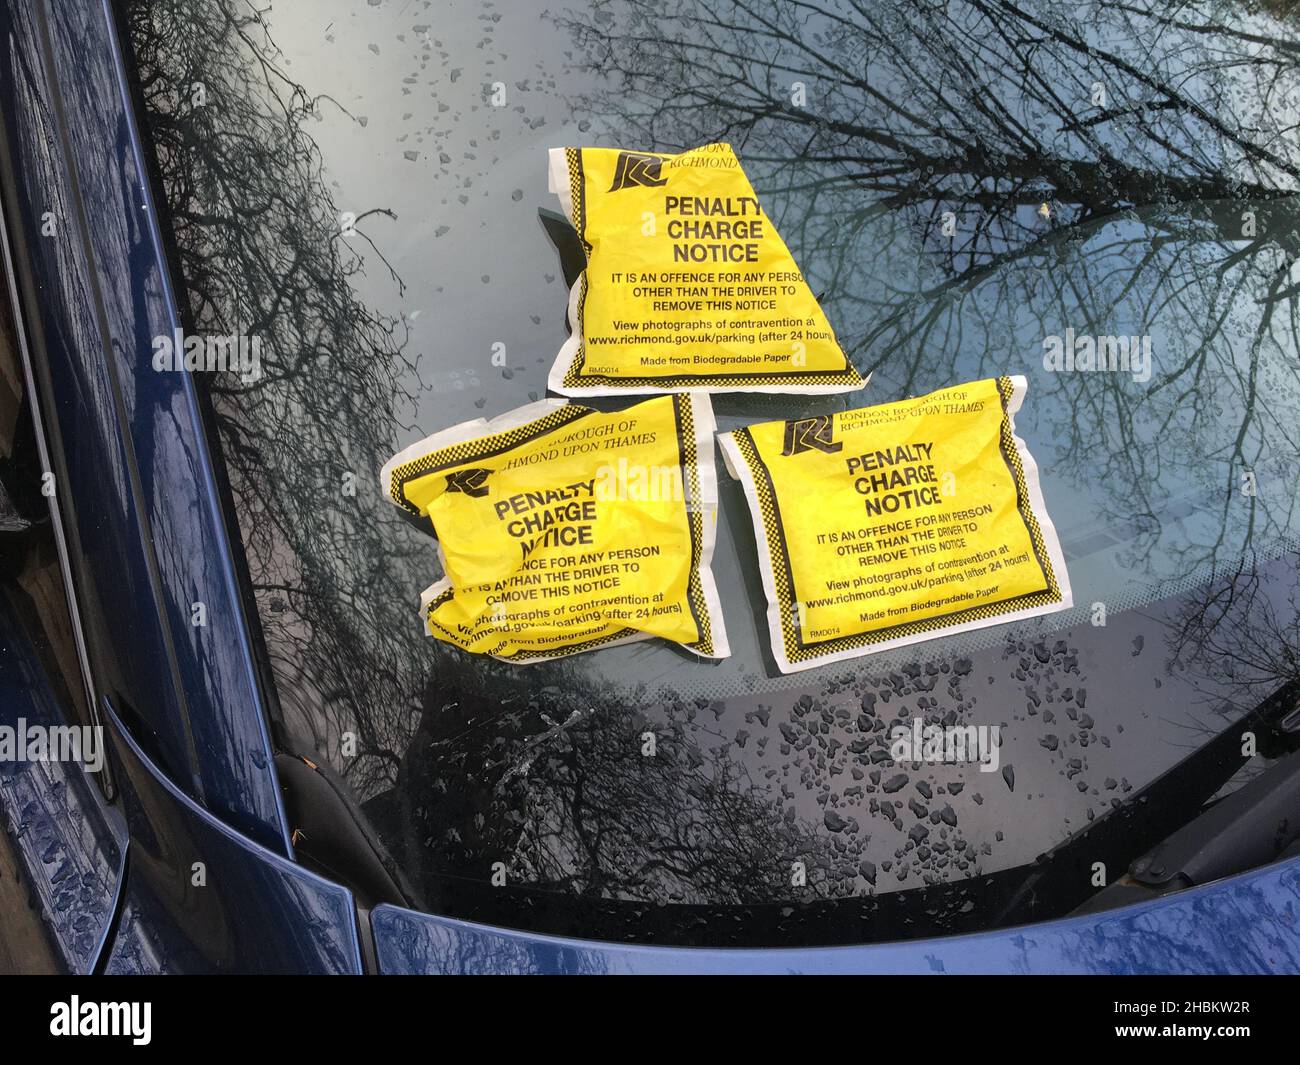 Multiple parking ticket / tickets issued to one car committing an offence over a period of three days by the London Borough of Richmond upon Thames.  (127) Stock Photo